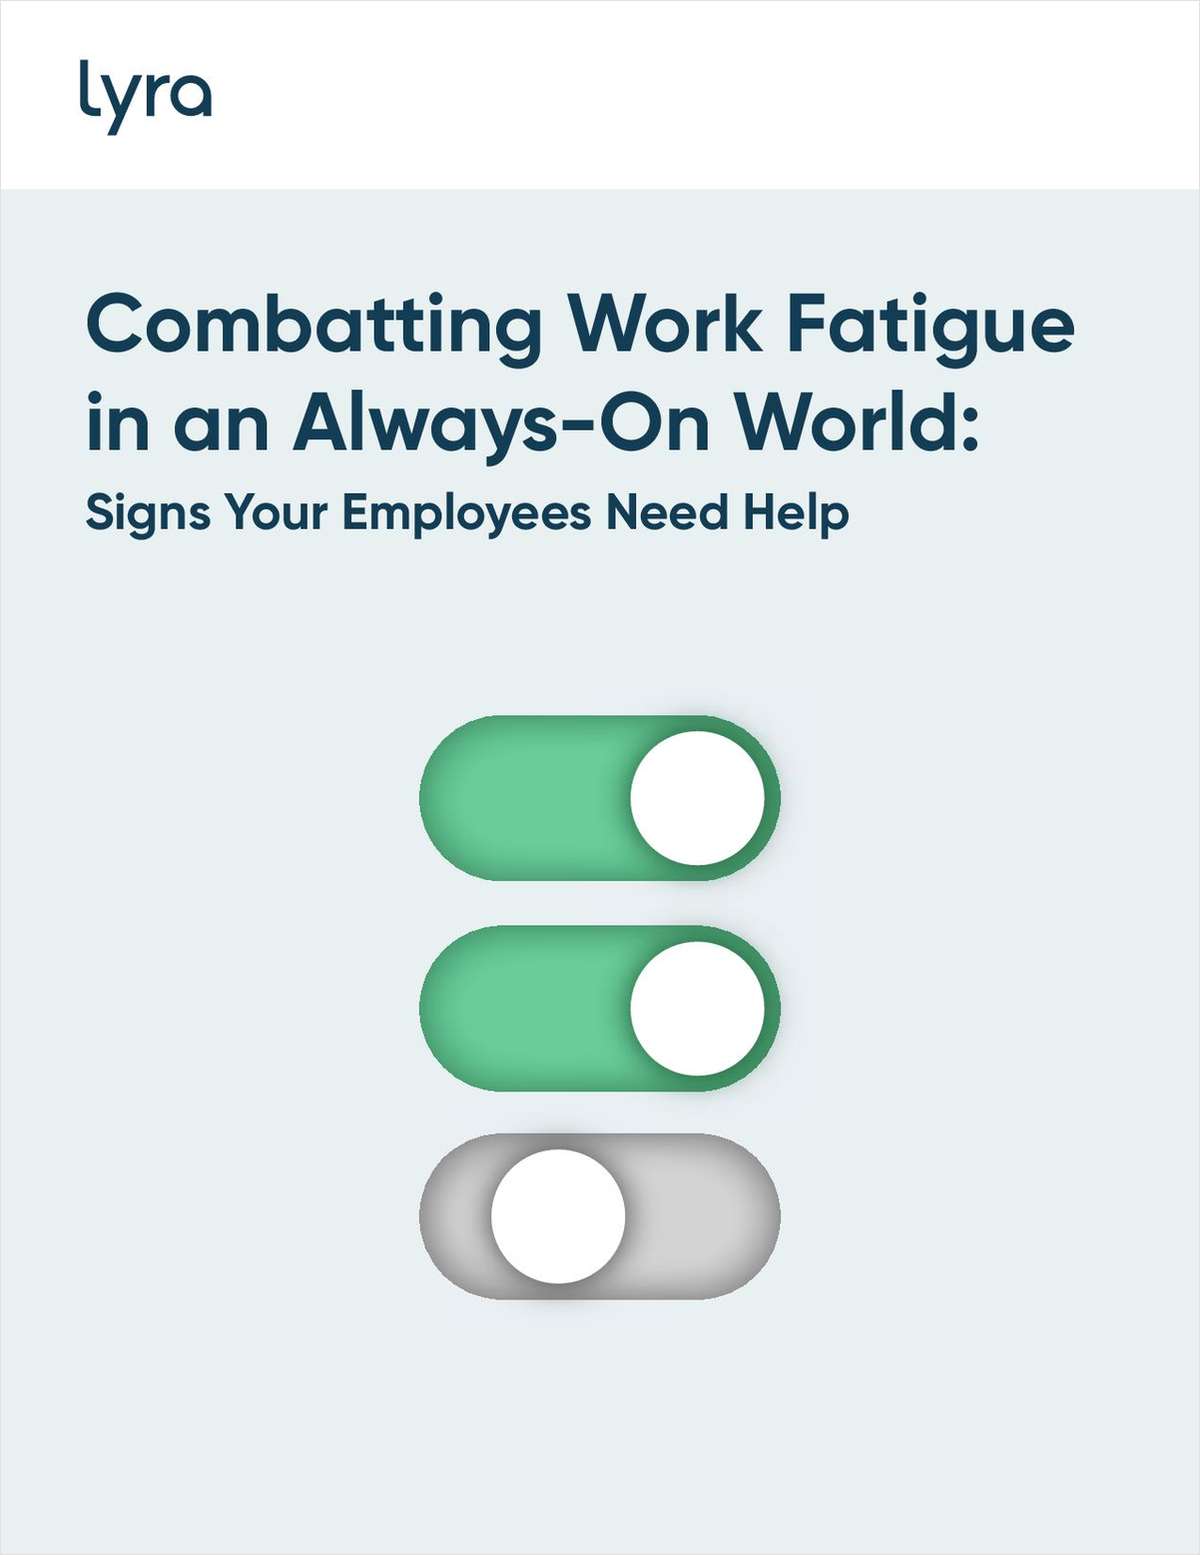 Combatting Work Fatigue in an Always-On World: Signs Your Employees Need Help